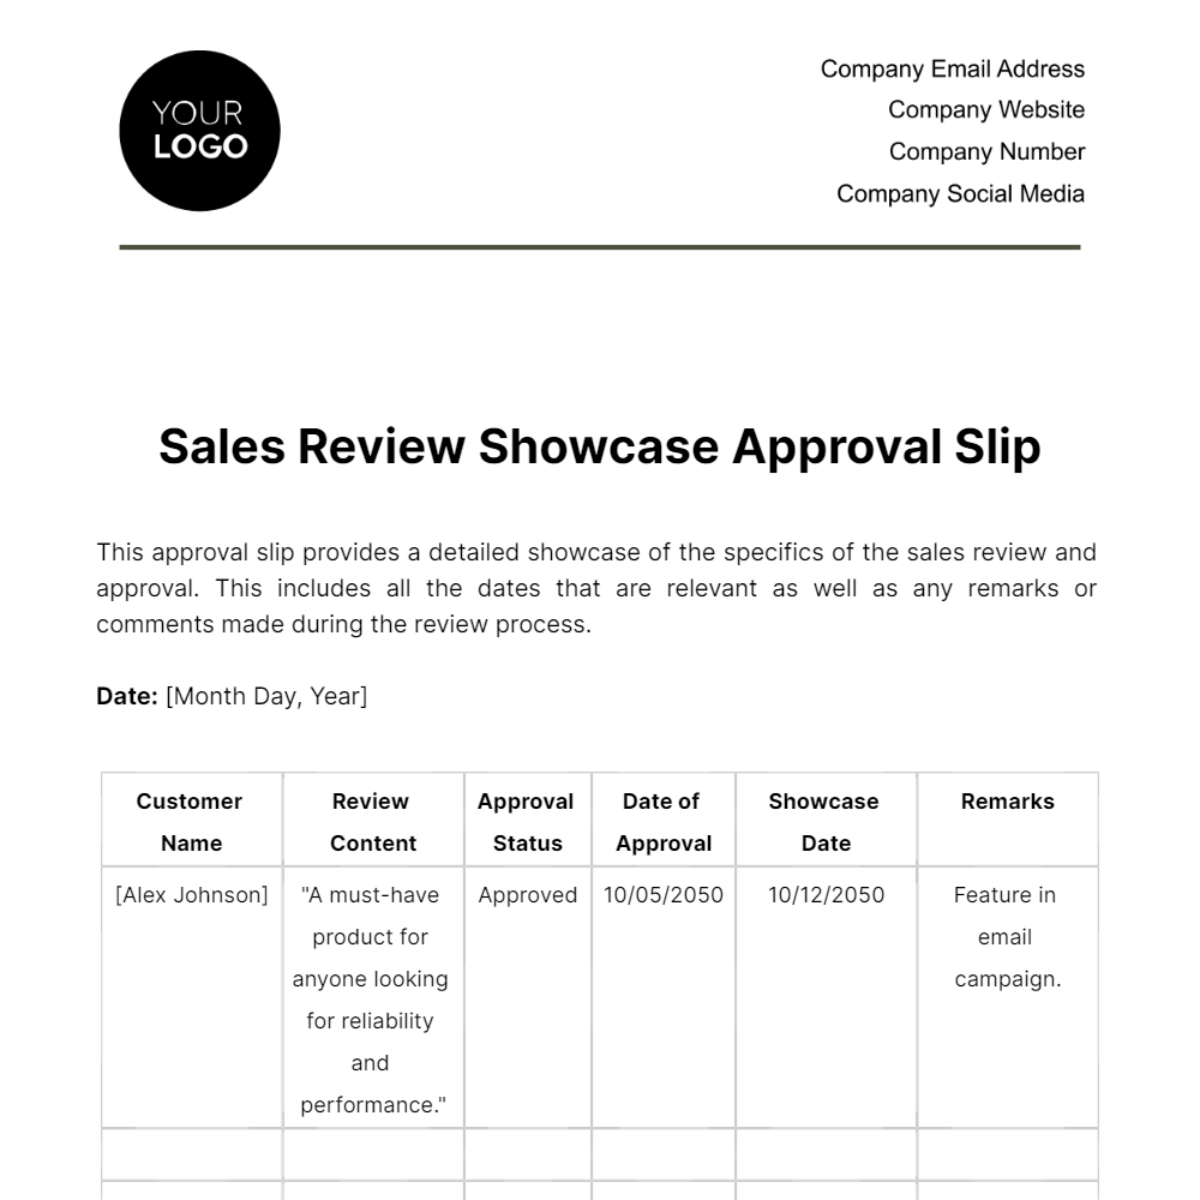 Free Sales Review Showcase Approval Slip Template